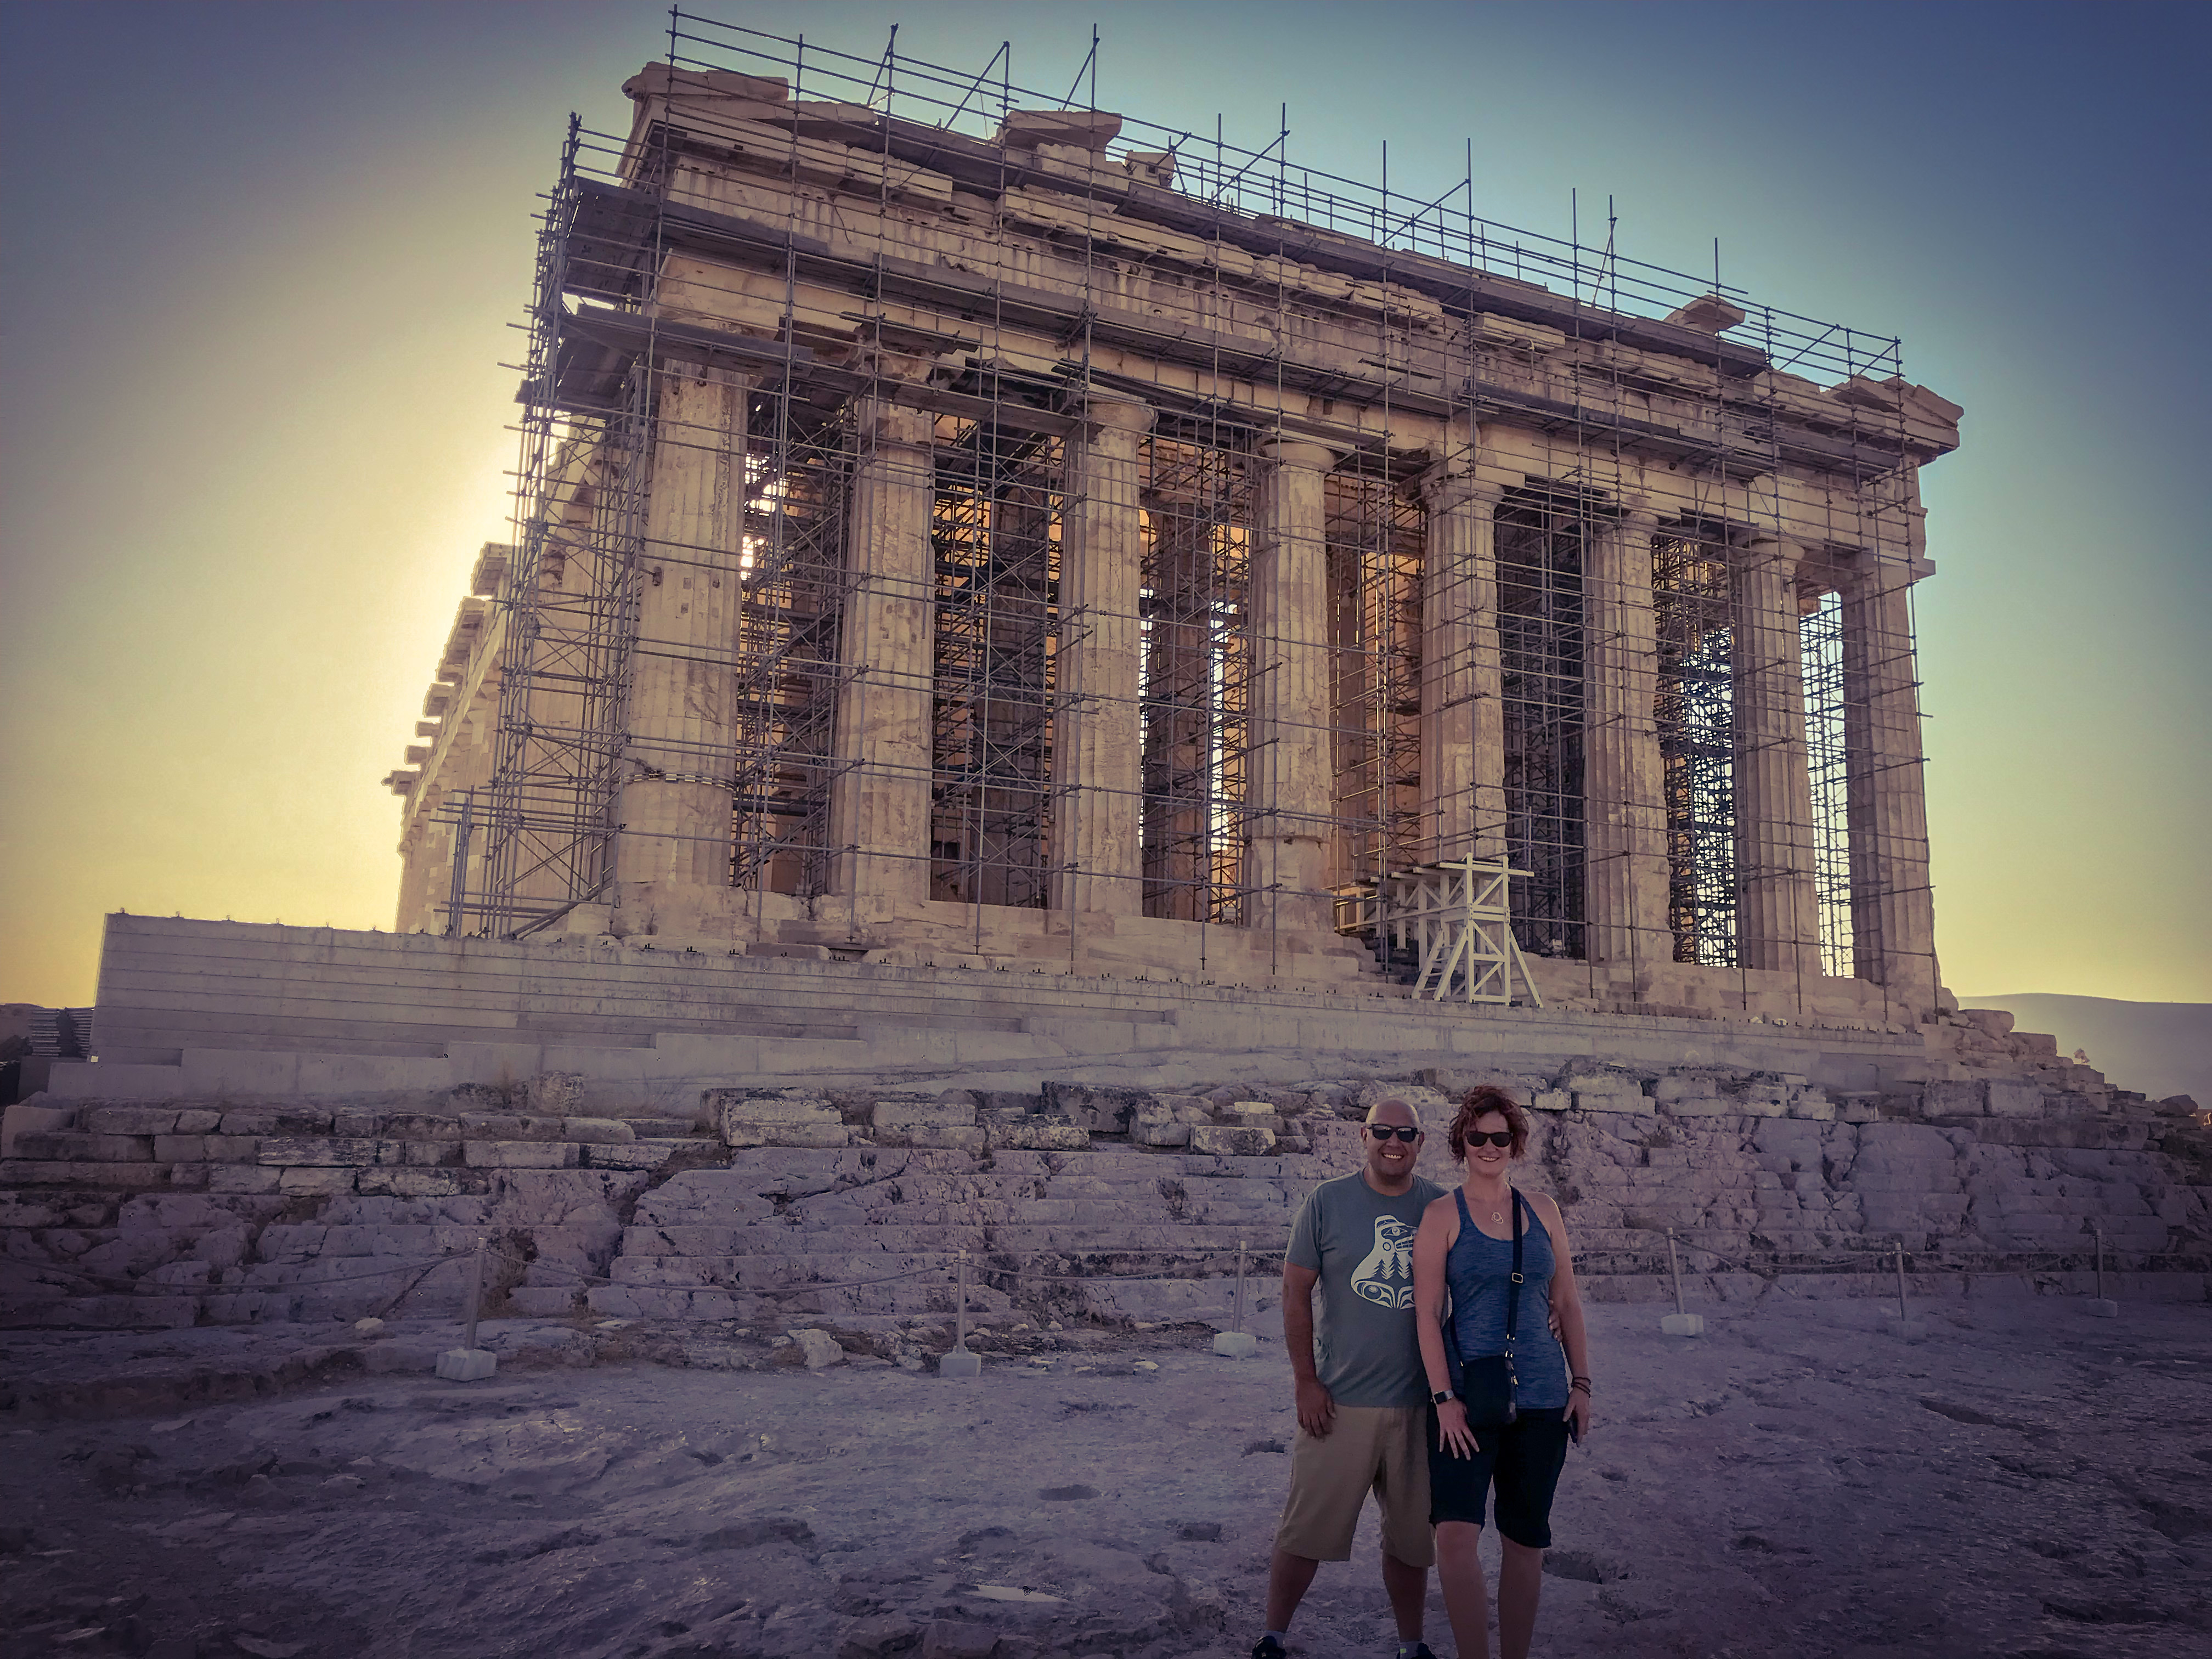 The Parthenon at the Acropolis in Athens, Greece at 8:15am where there was nobody else in the picture but us.